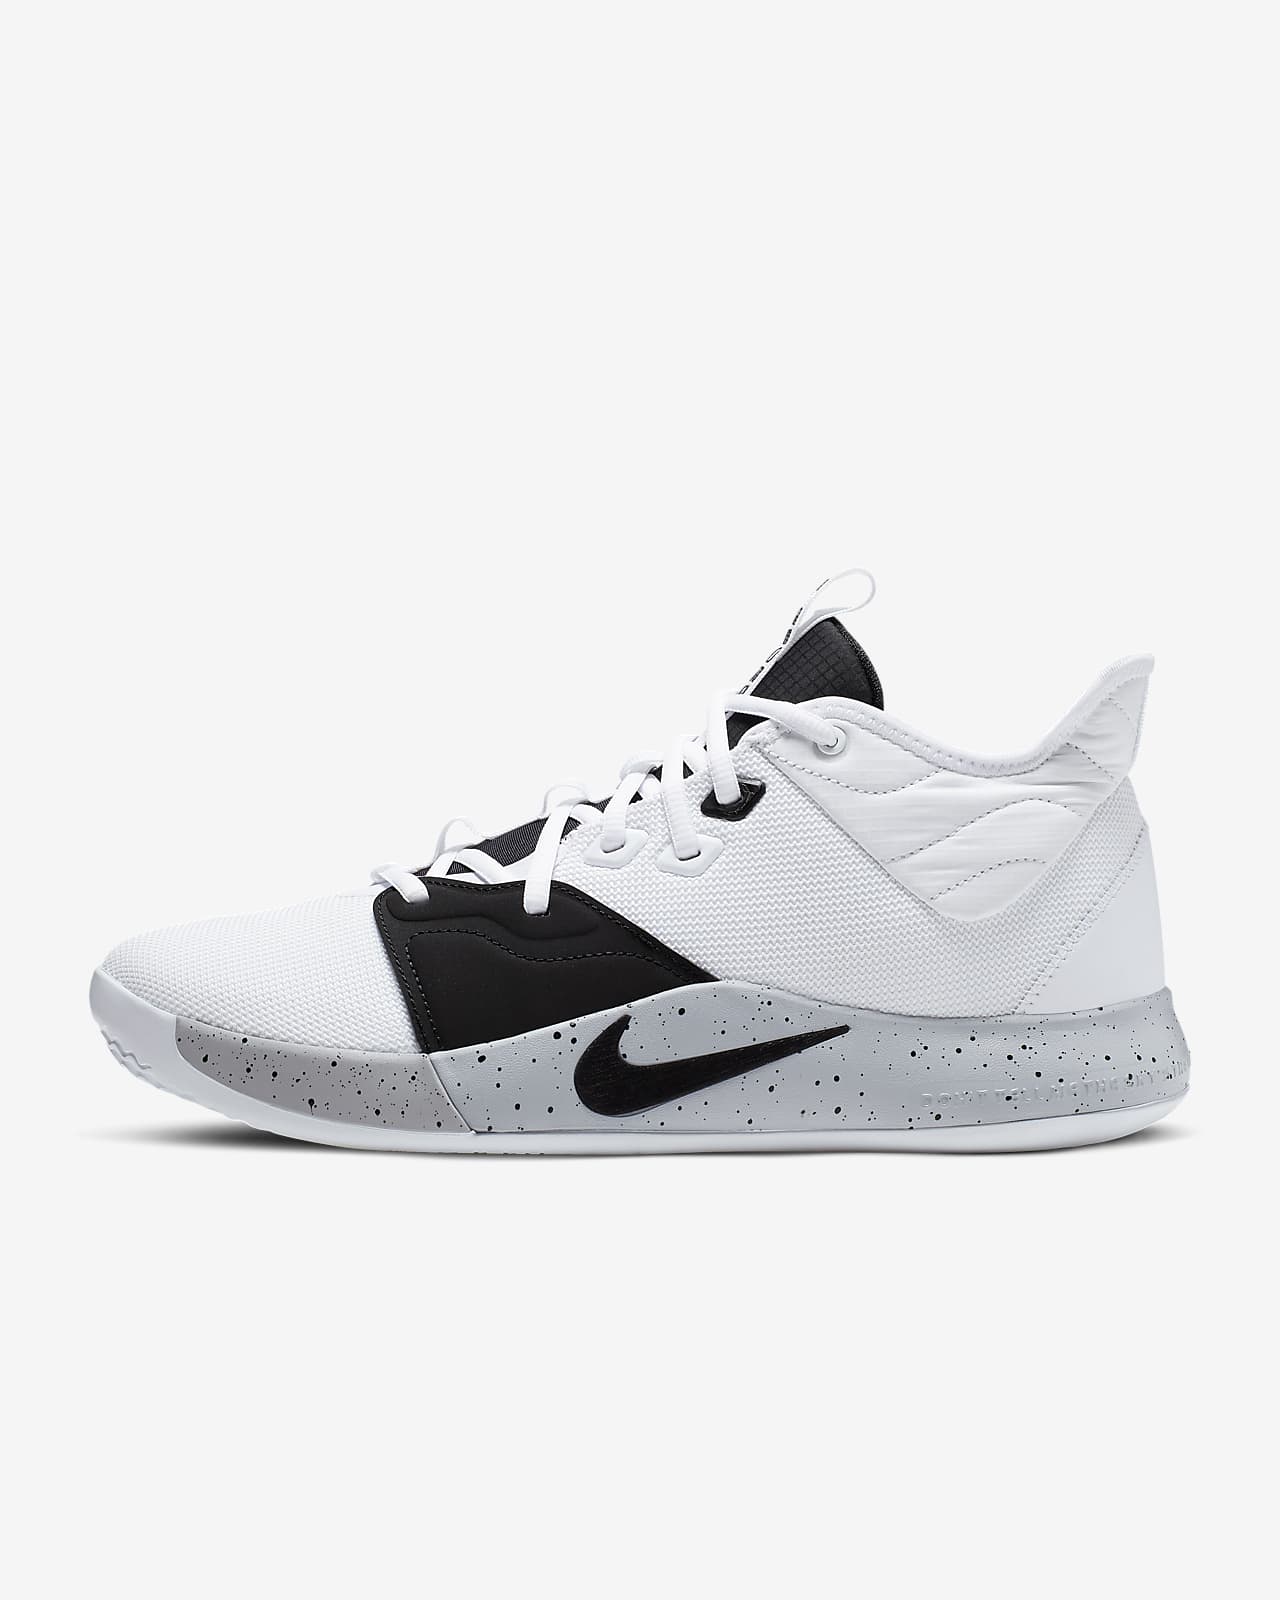 pg3 shoes price